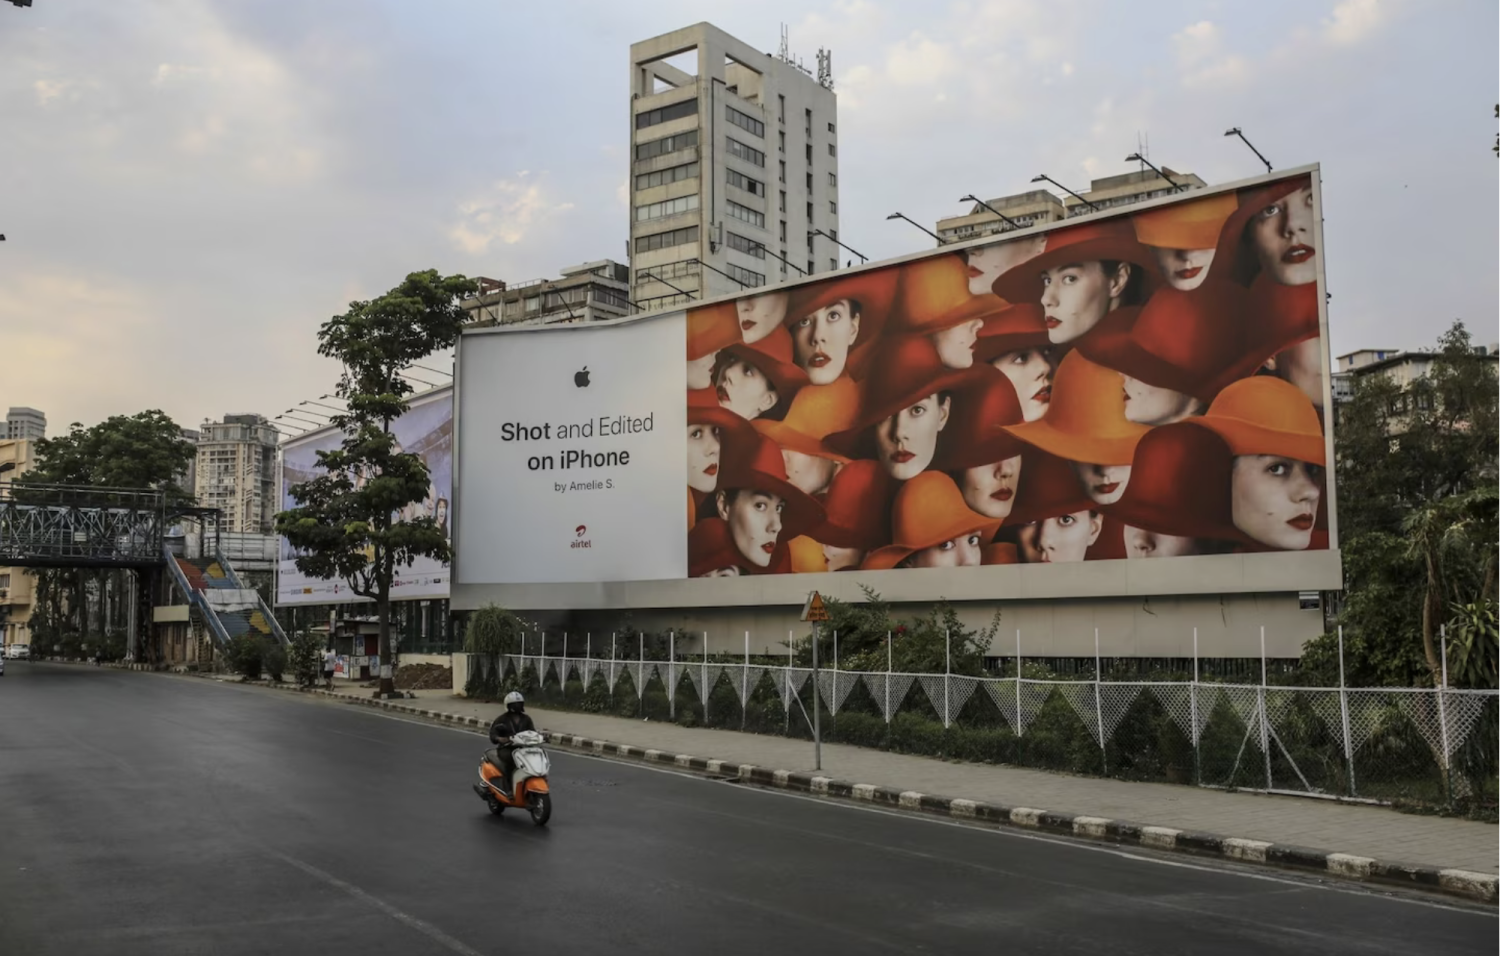 A motorist rides past a billboard for the iPhone in Mumbai. One spyware industry expert said Apple is “treading a very delicate line” with India, as the company seeks to balance its mission of protecting privacy with avoiding putting an important market at risk. (Dhiraj Singh/Bloomberg News)